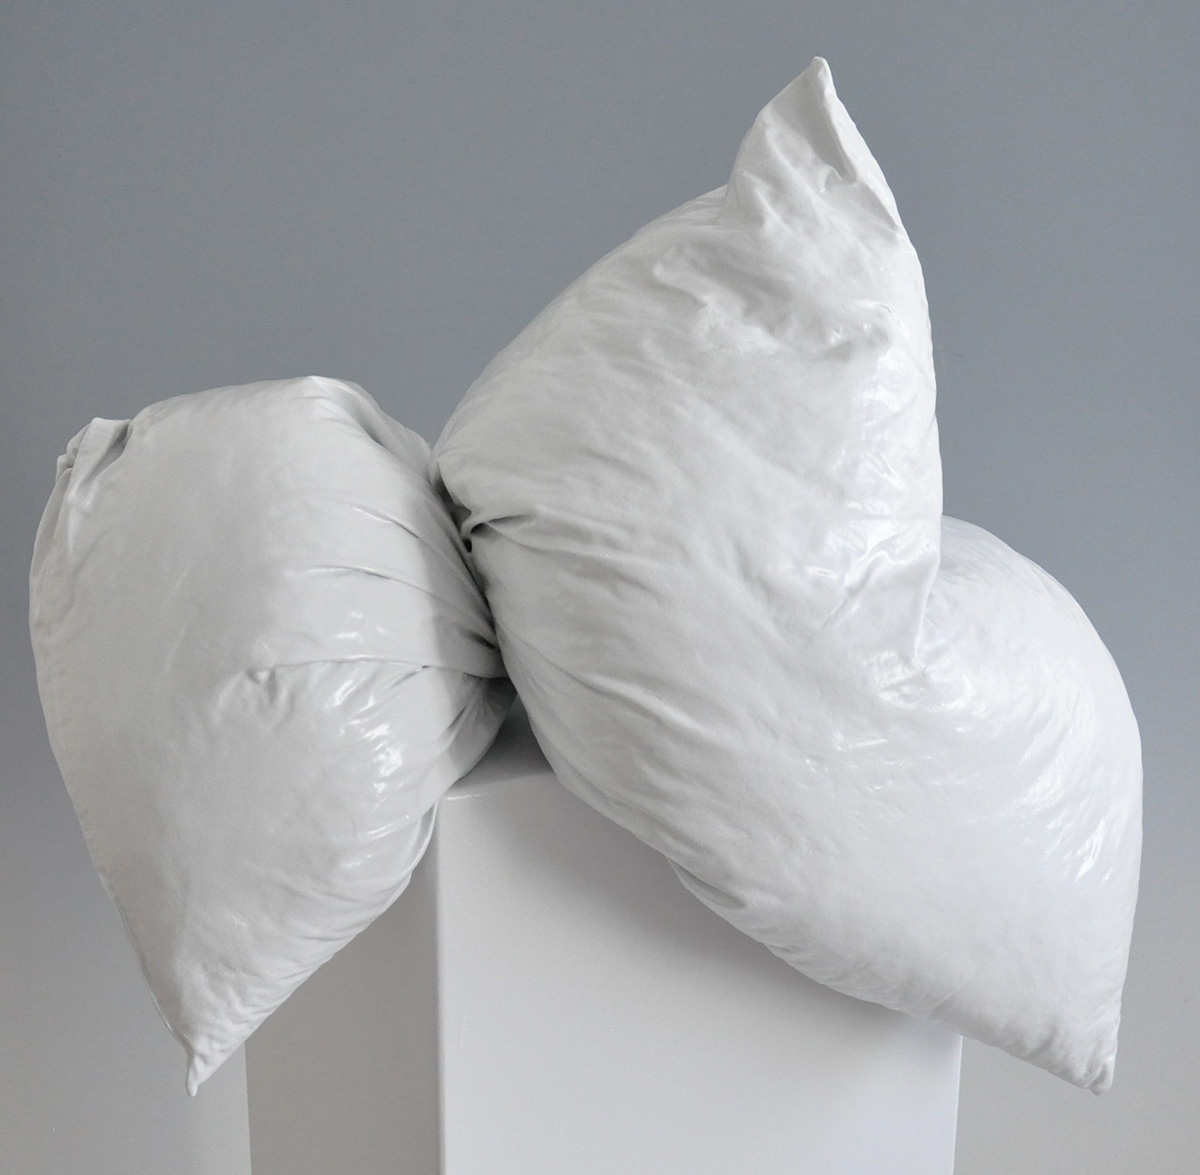 Untitled (Pillow), 201860 x 36 x 41 cmMixed material